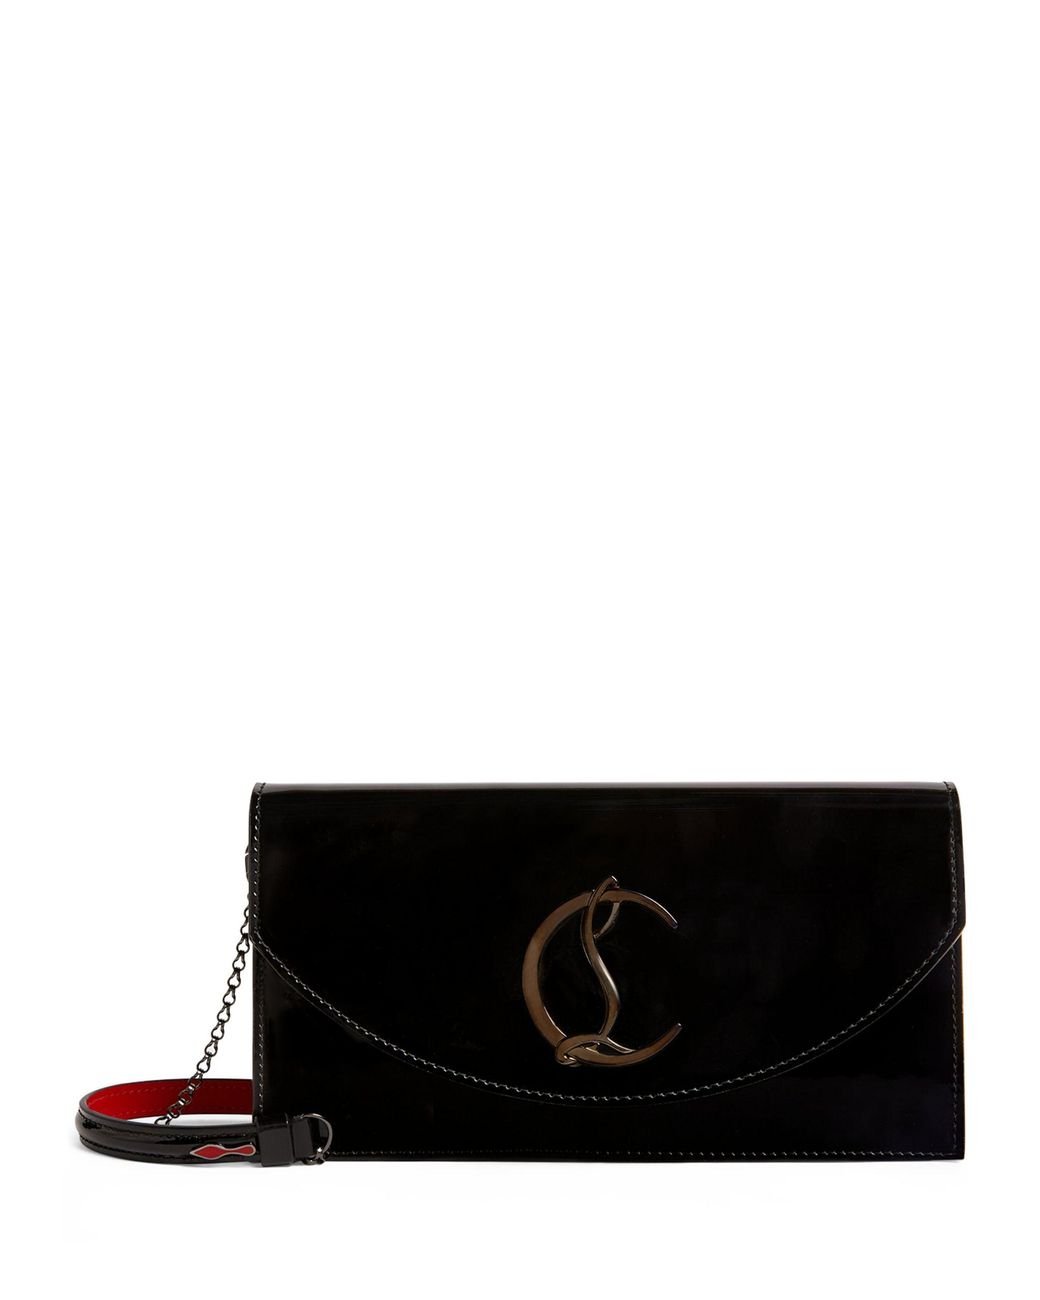 Christian Louboutin Leather Loubi54 Patent Clutch Bag in Black - Lyst